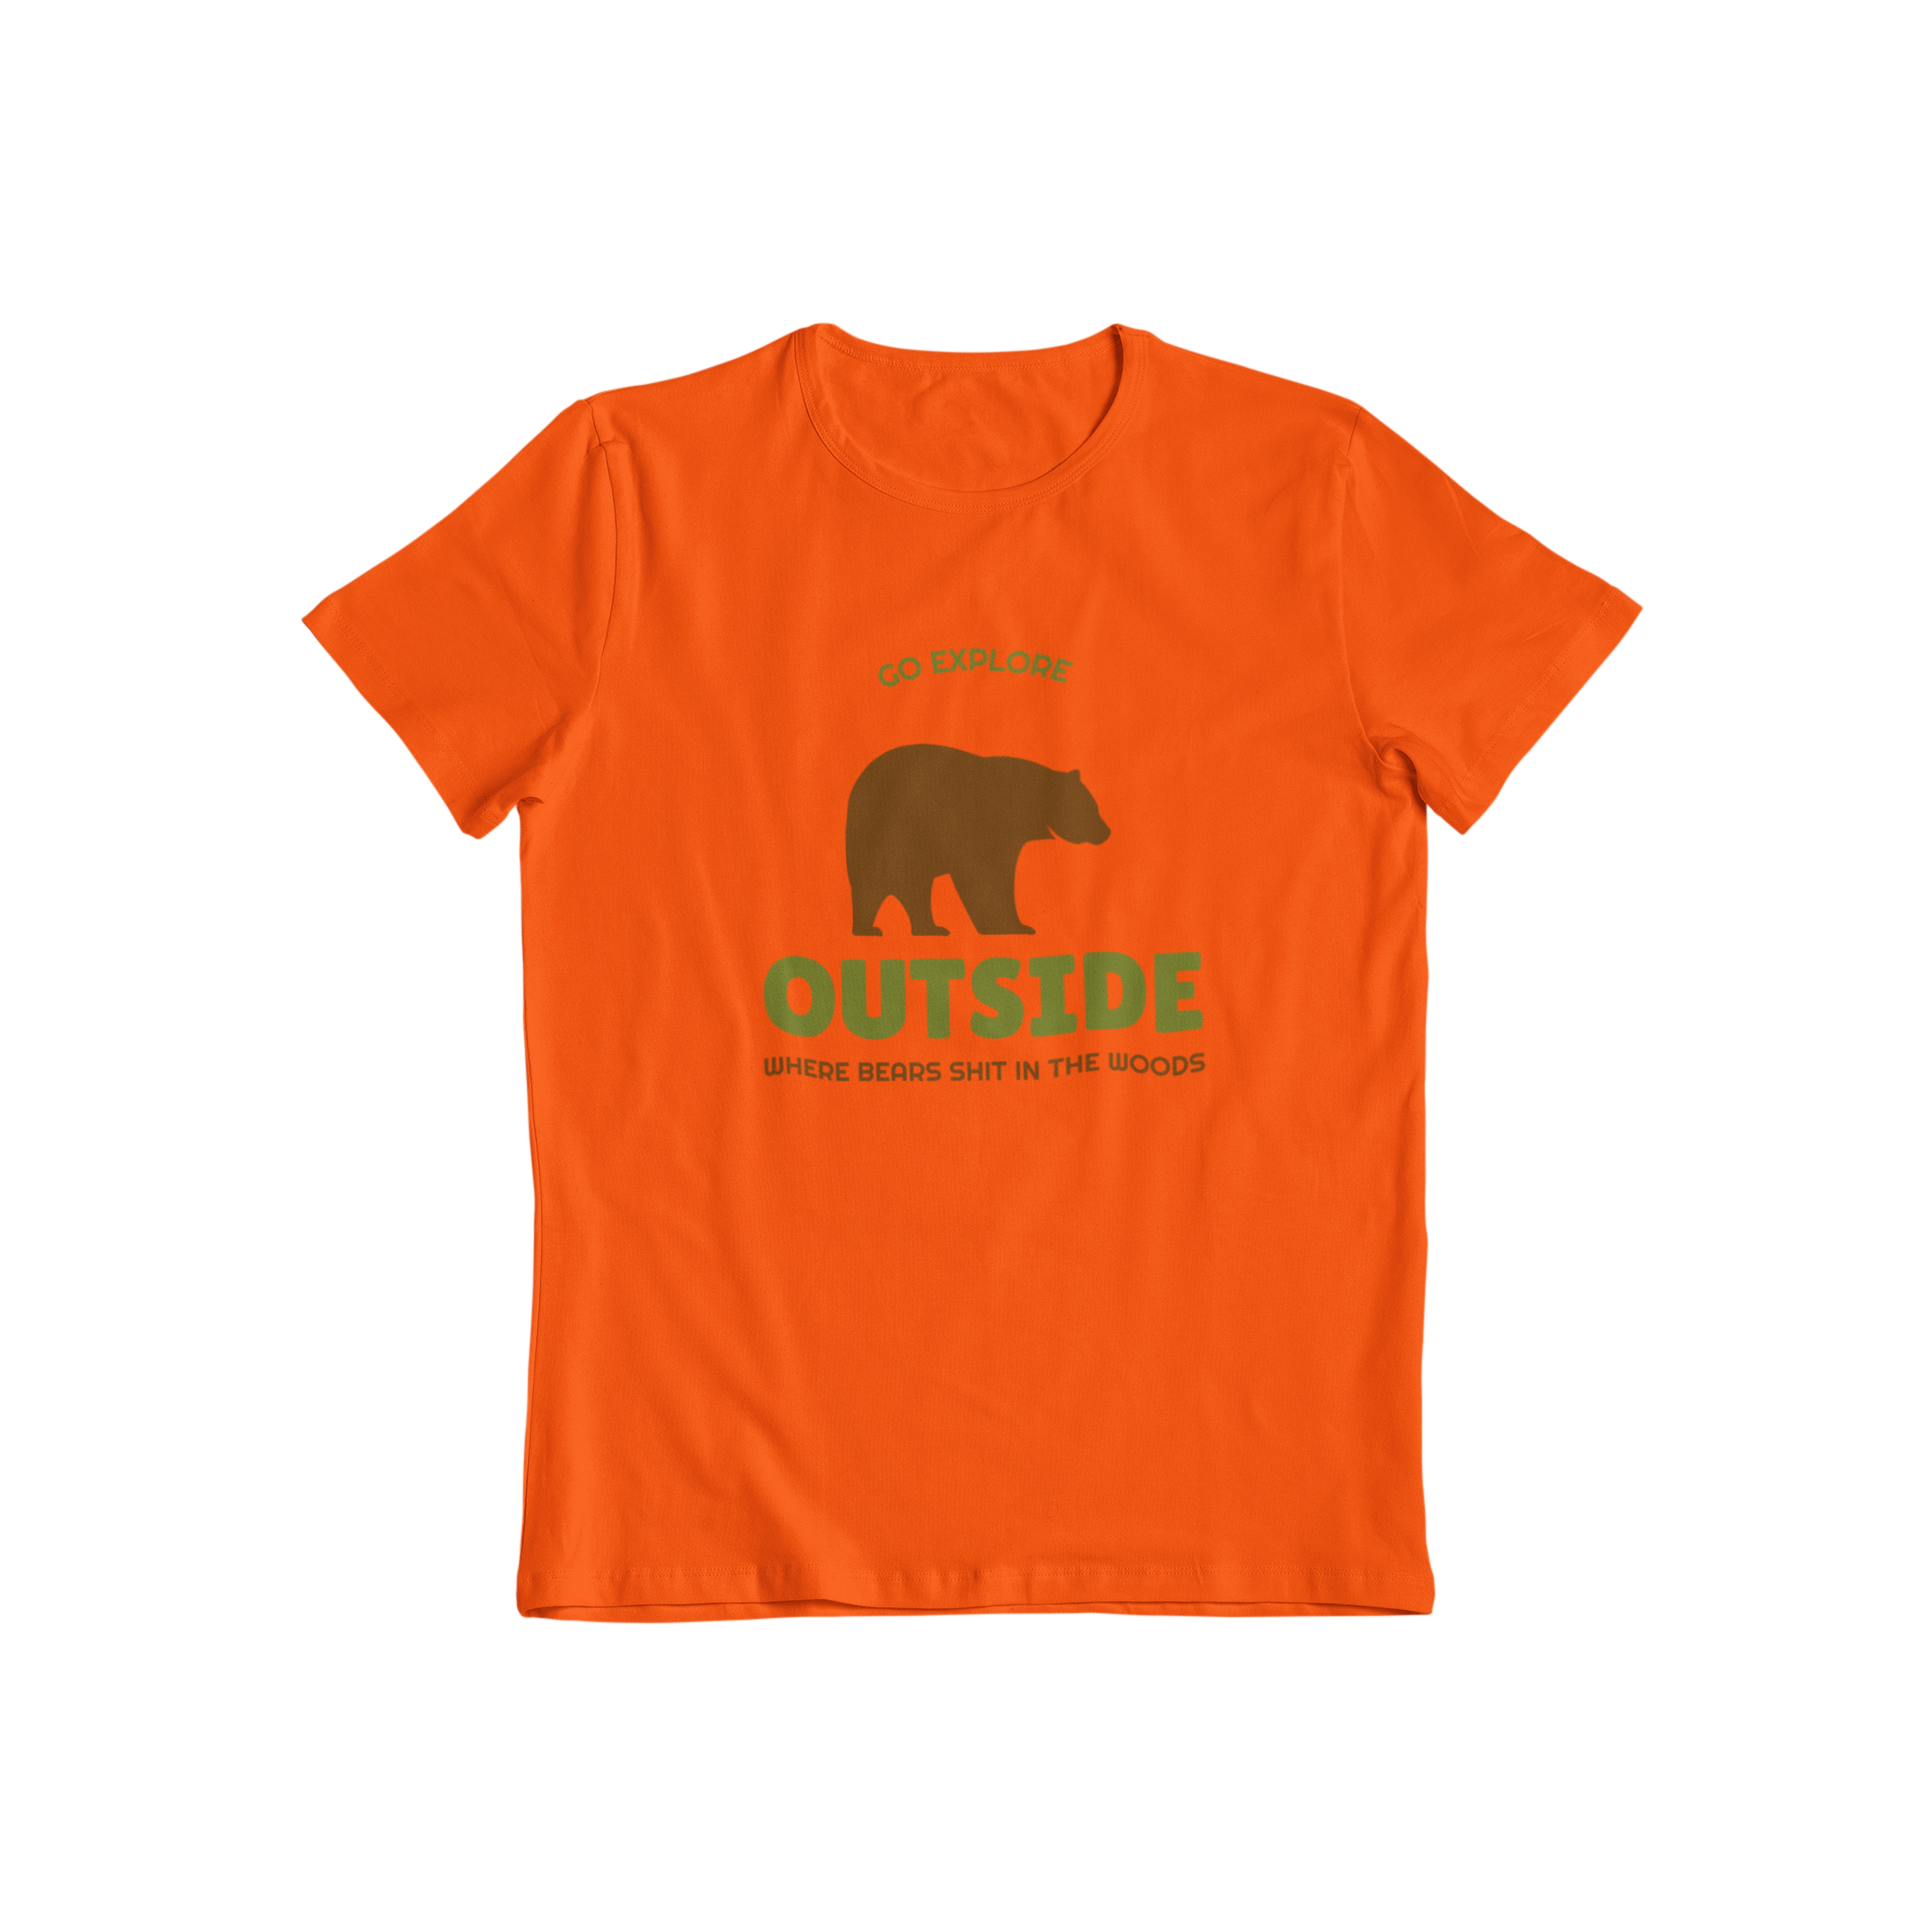 Looking for a unique t-shirt that encourages you to explore the great outdoors? Check out Teevolution! Our t-shirt design is perfect for those who love to hike, camp, and adventure outside. With the slogan "go outside, where bears shit in the woods," our t-shirt is sure to make a statement and inspire you to get out and explore!